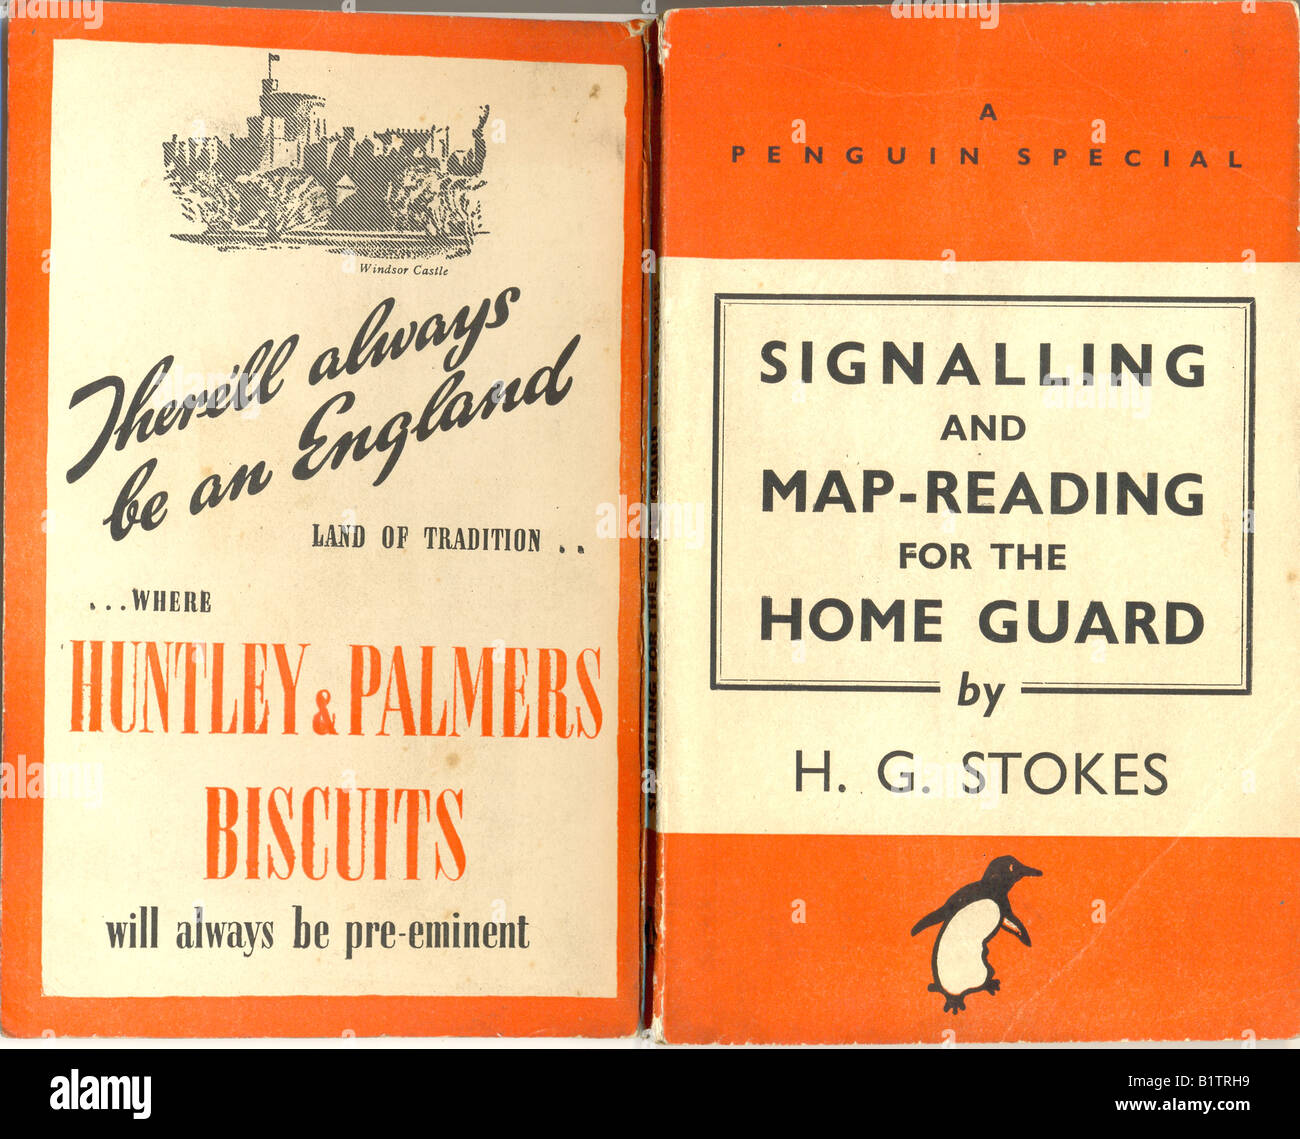 Penguin book 'Signalling and Map-reading for the Home Guard' by H G Stokes  with advertisement for Huntley & Palmers biscuits Stock Photo